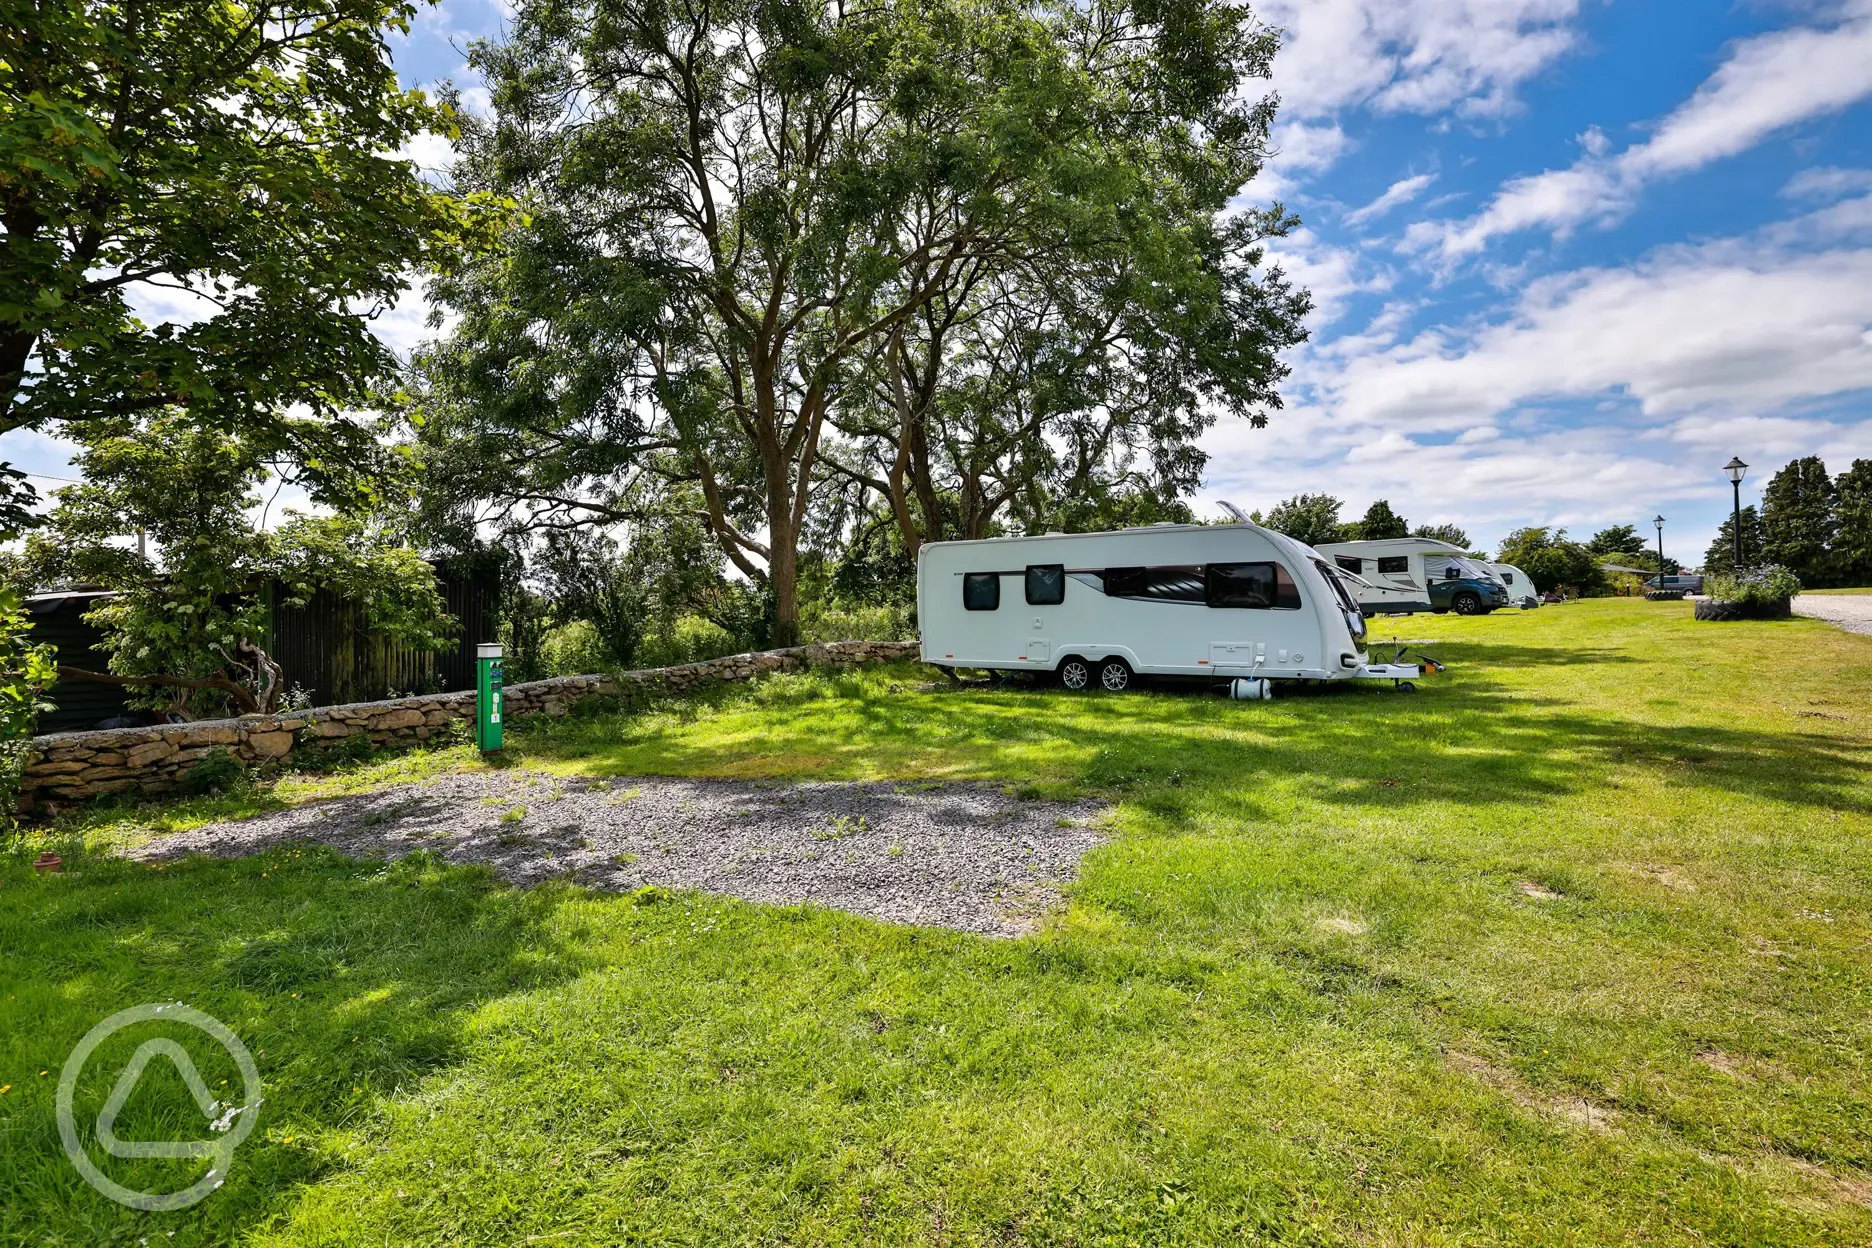 Fully serviced hardstanding and grass pitches